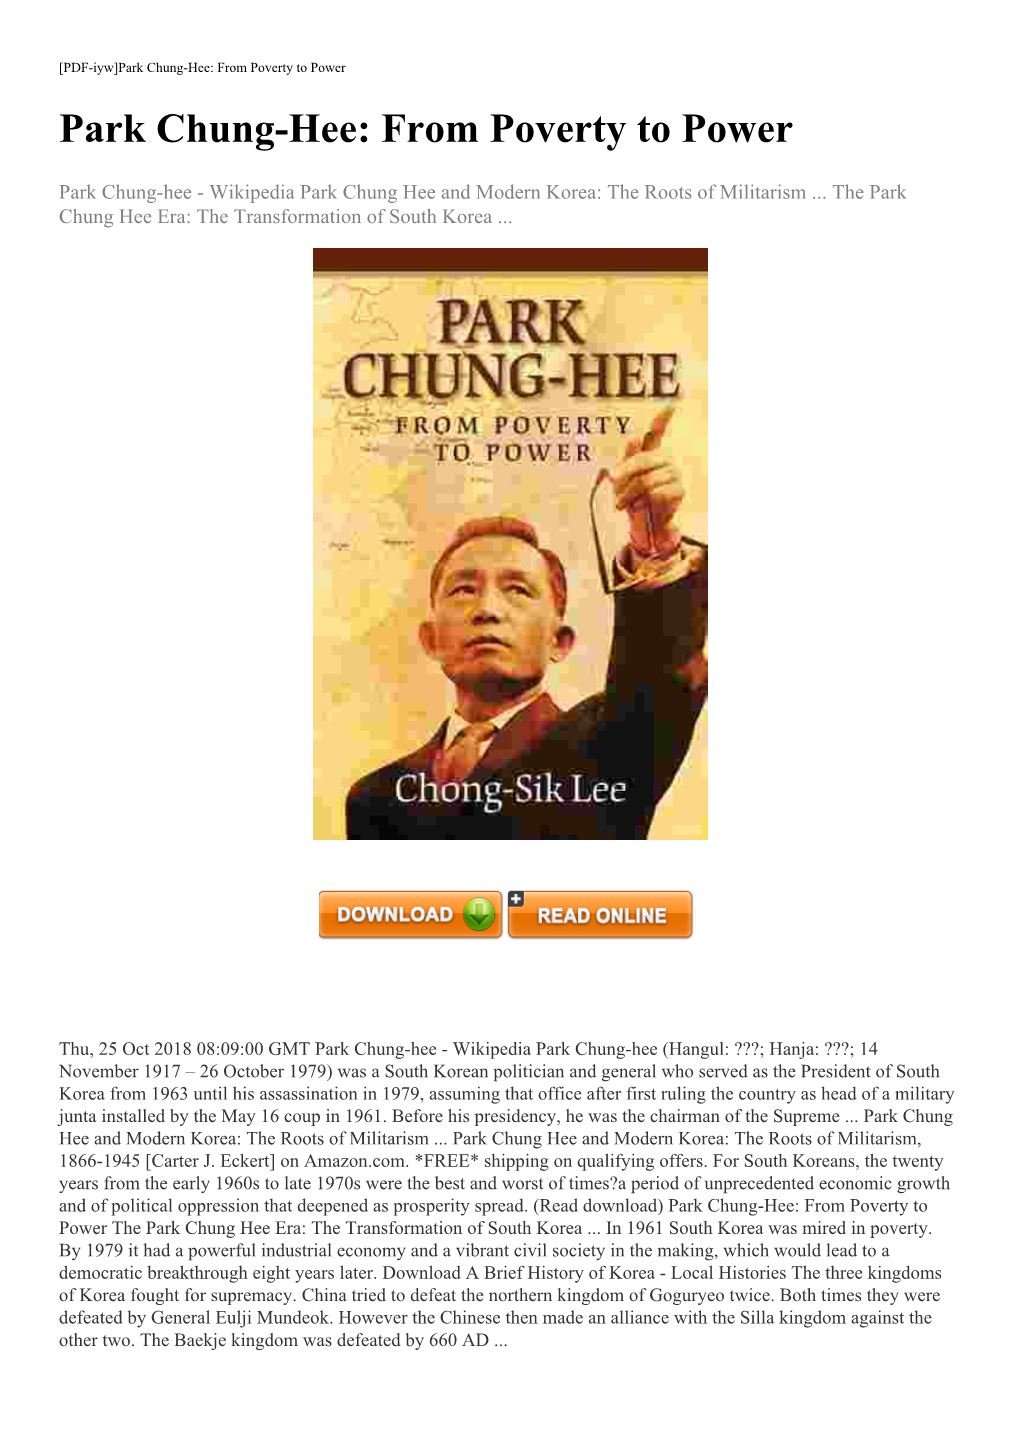 (Read Download) Park Chung-Hee: from Poverty to Power the Park Chung Hee Era: the Transformation of South Korea